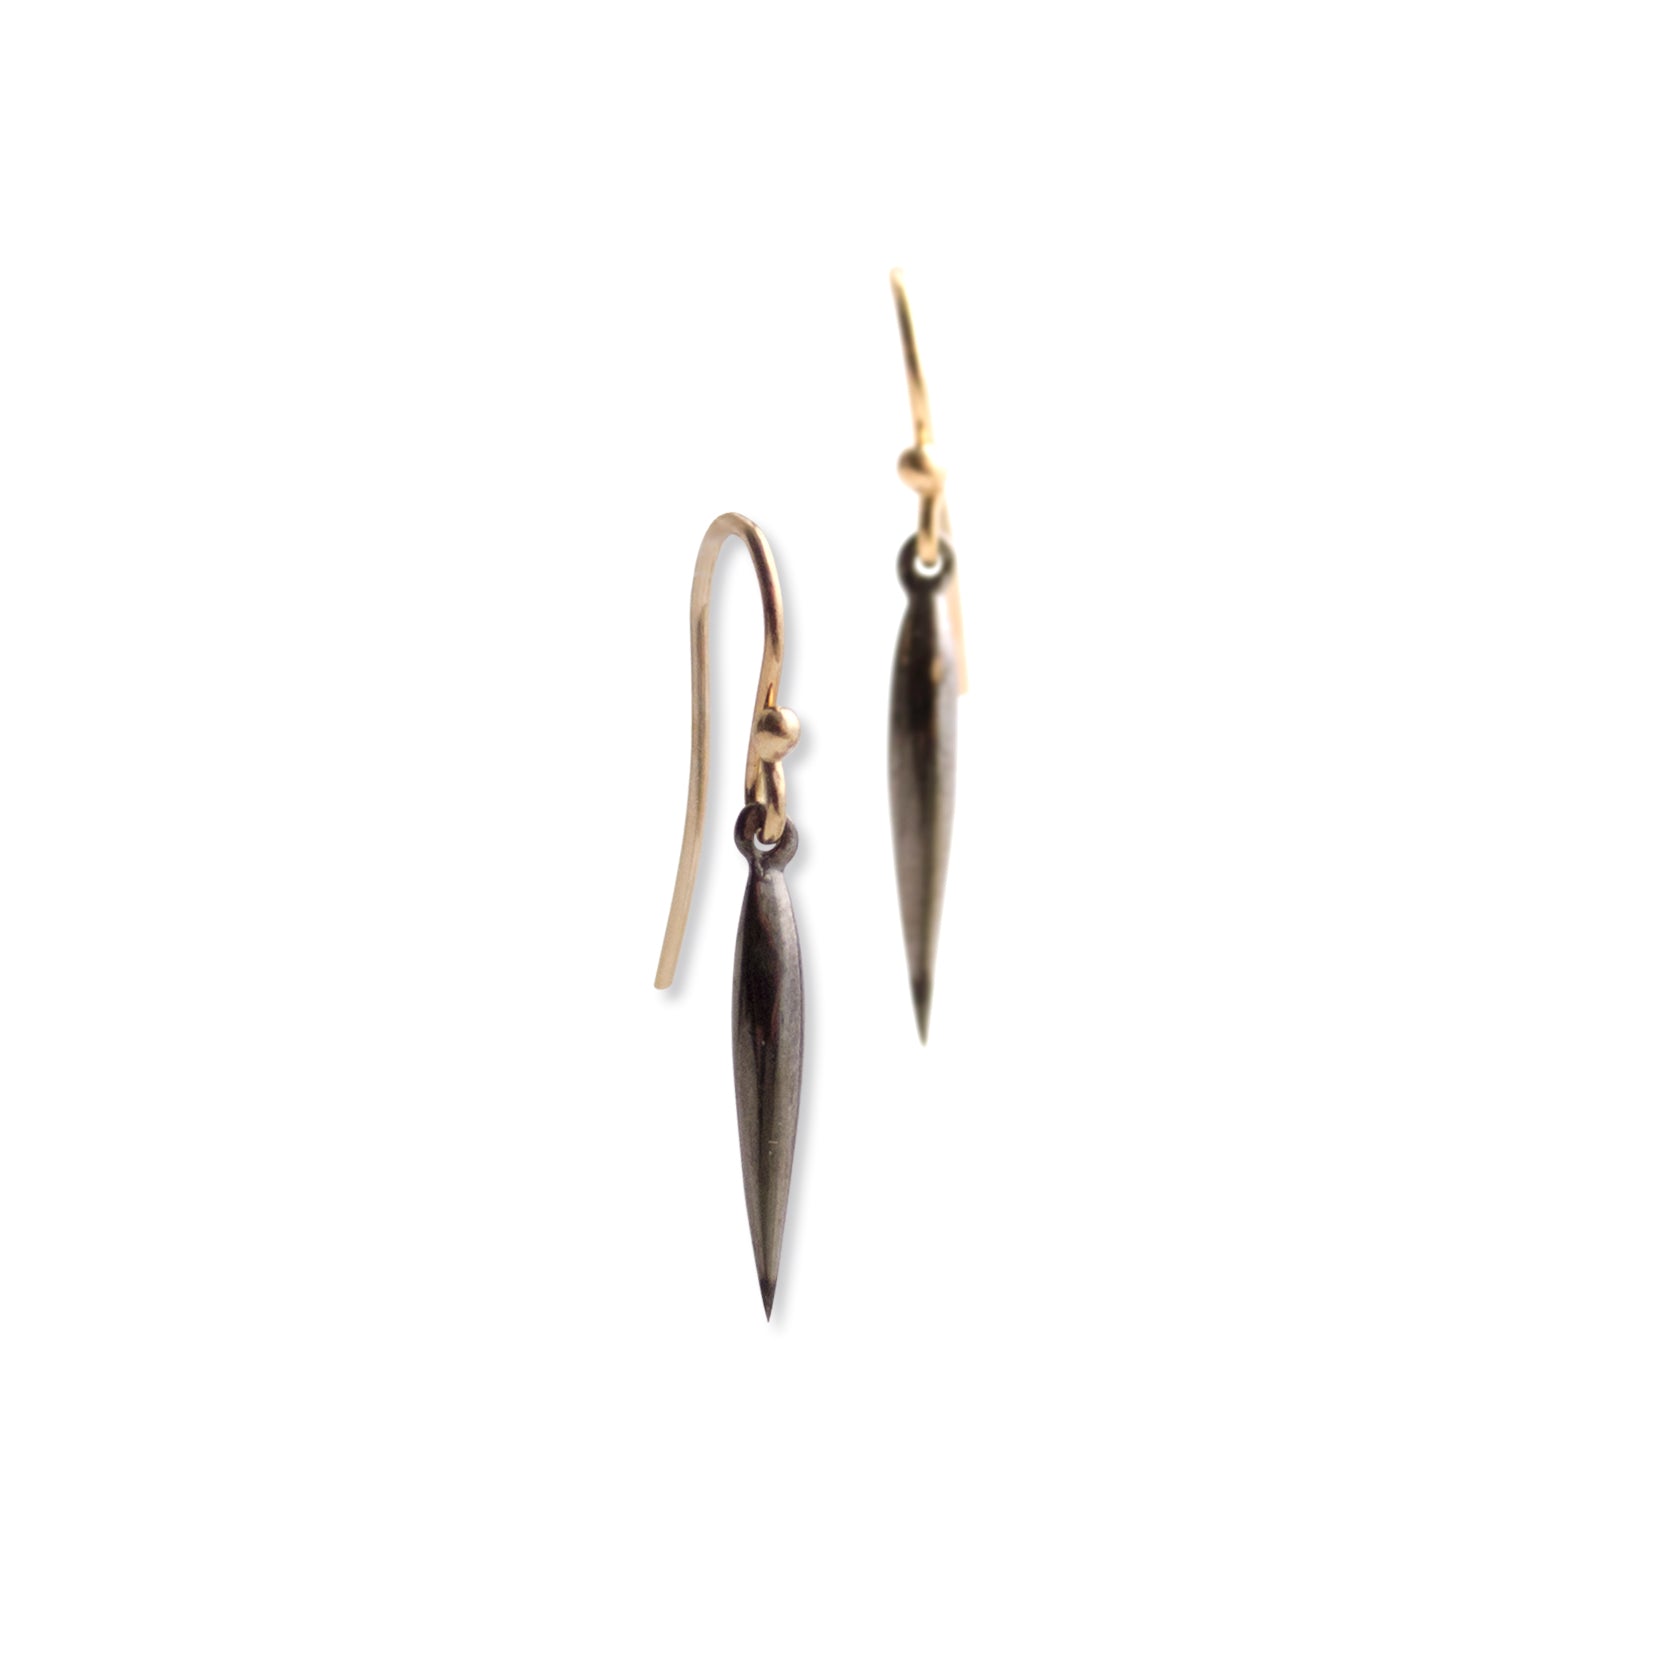 sterling silver plated in black rhodium with 14k yellow earwire - small swell dangle earrings